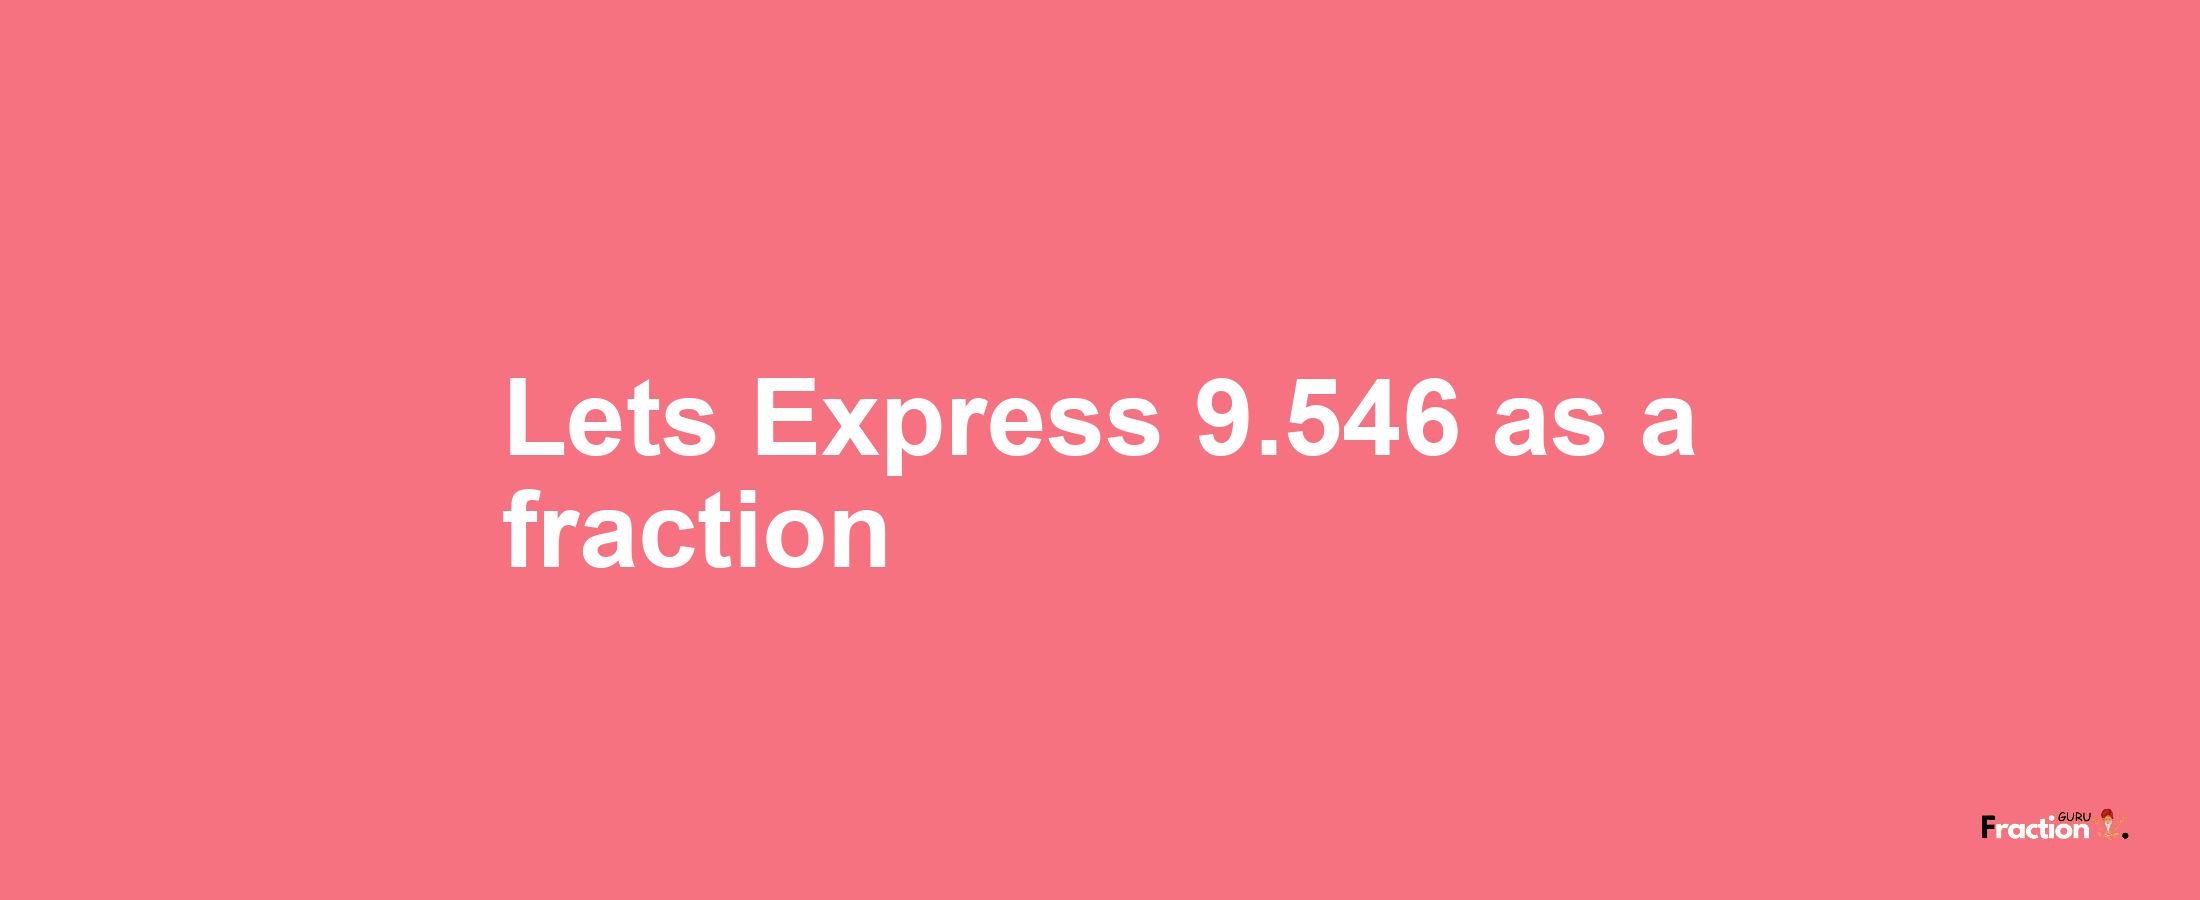 Lets Express 9.546 as afraction